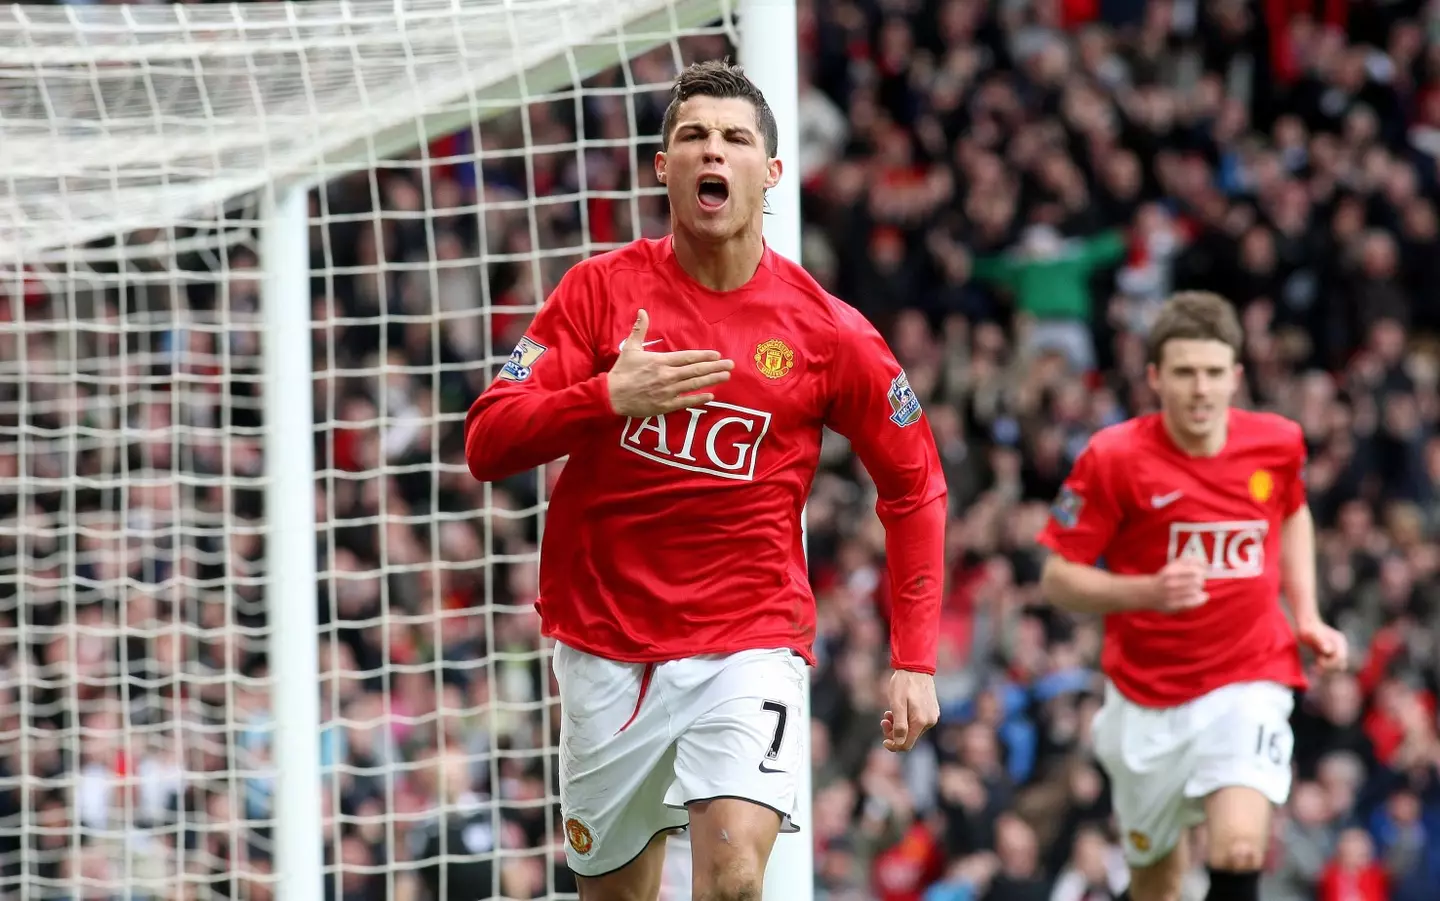 Manchester United pulled off the near-unthinkable by bringing Cristiano Ronaldo back to the club